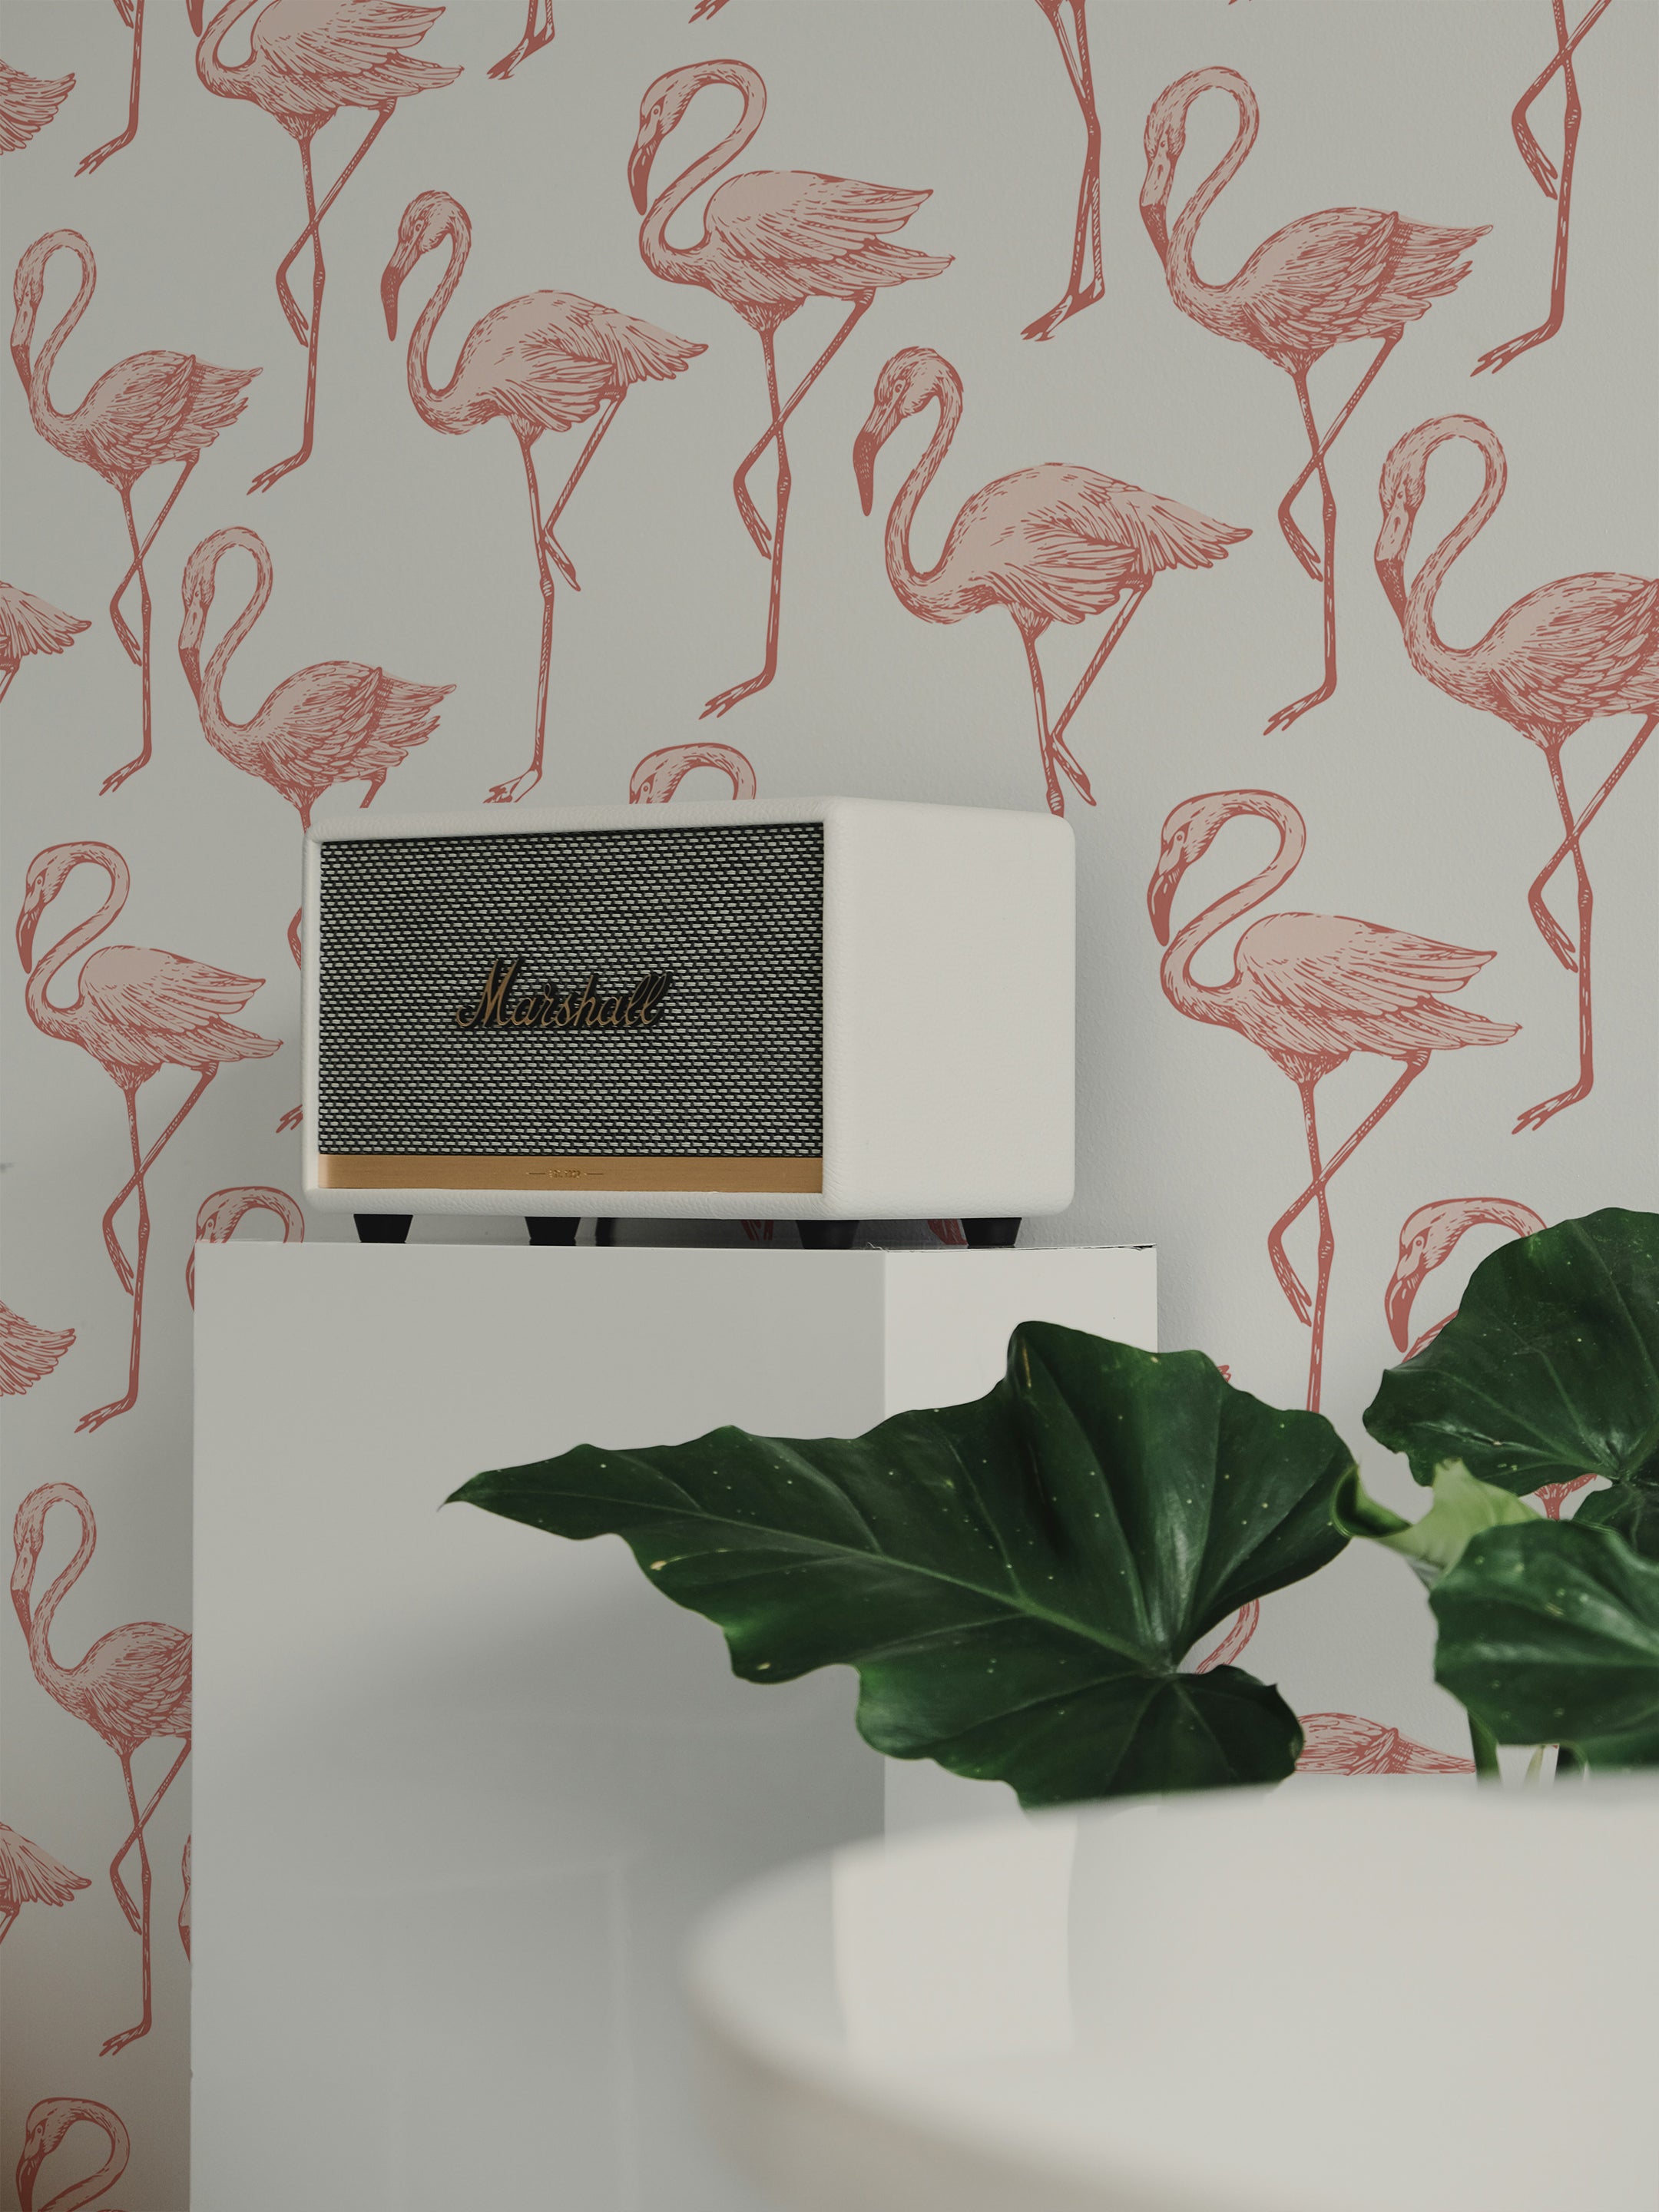 A stylish white speaker from Marshall is placed atop a small white cabinet against a backdrop of the Flamingo Party Wallpaper, which features a playful pattern of pink flamingos on a white background. The scene is complemented by a large green leafy plant in the foreground, adding a touch of nature to the decor.